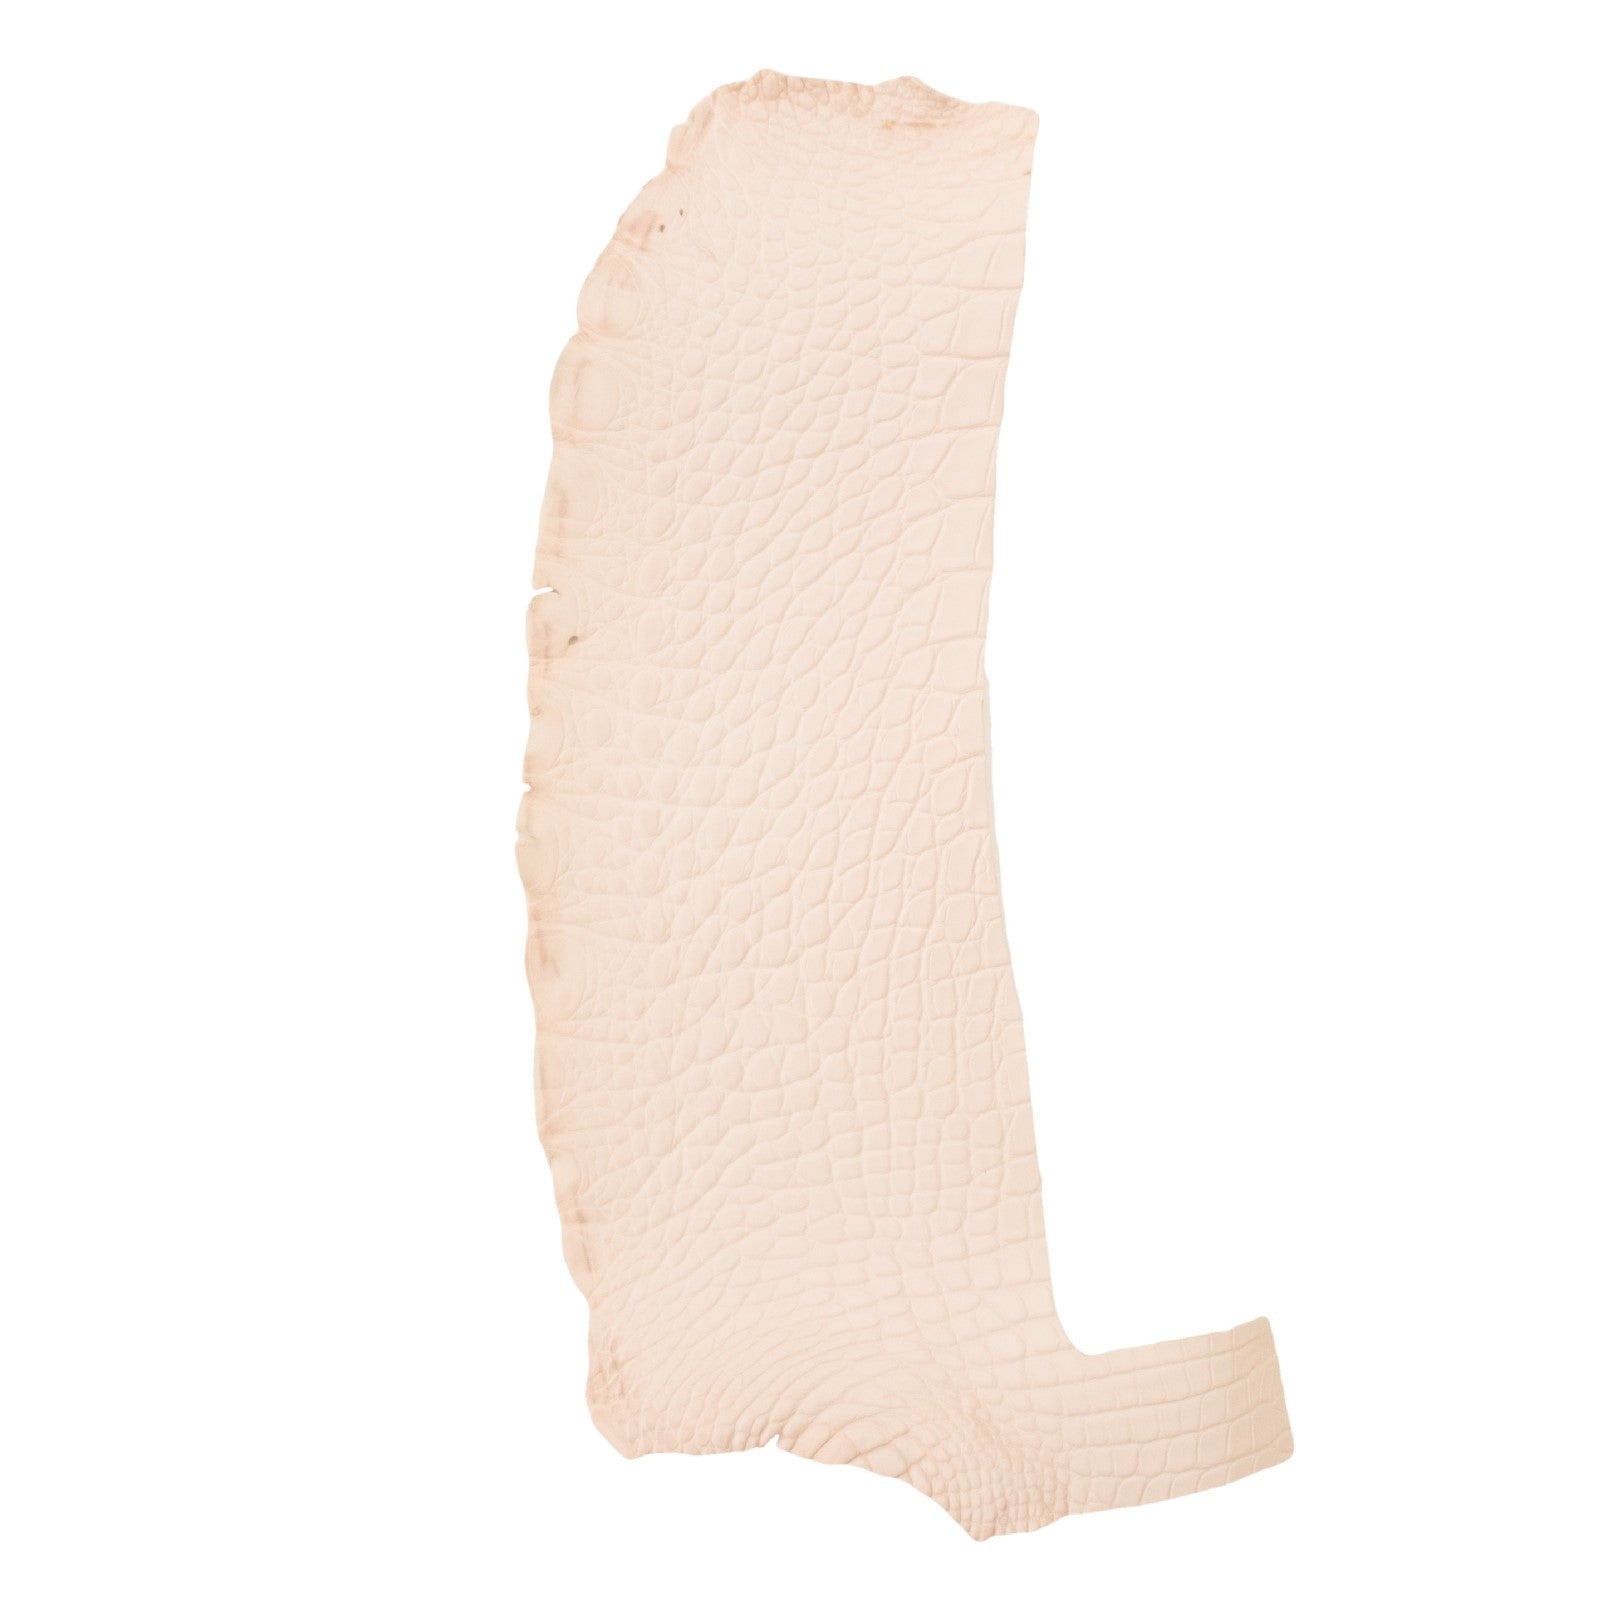 Alligator Skin Flank Various Colors Genuine Hide, Blush Pink | The Leather Guy